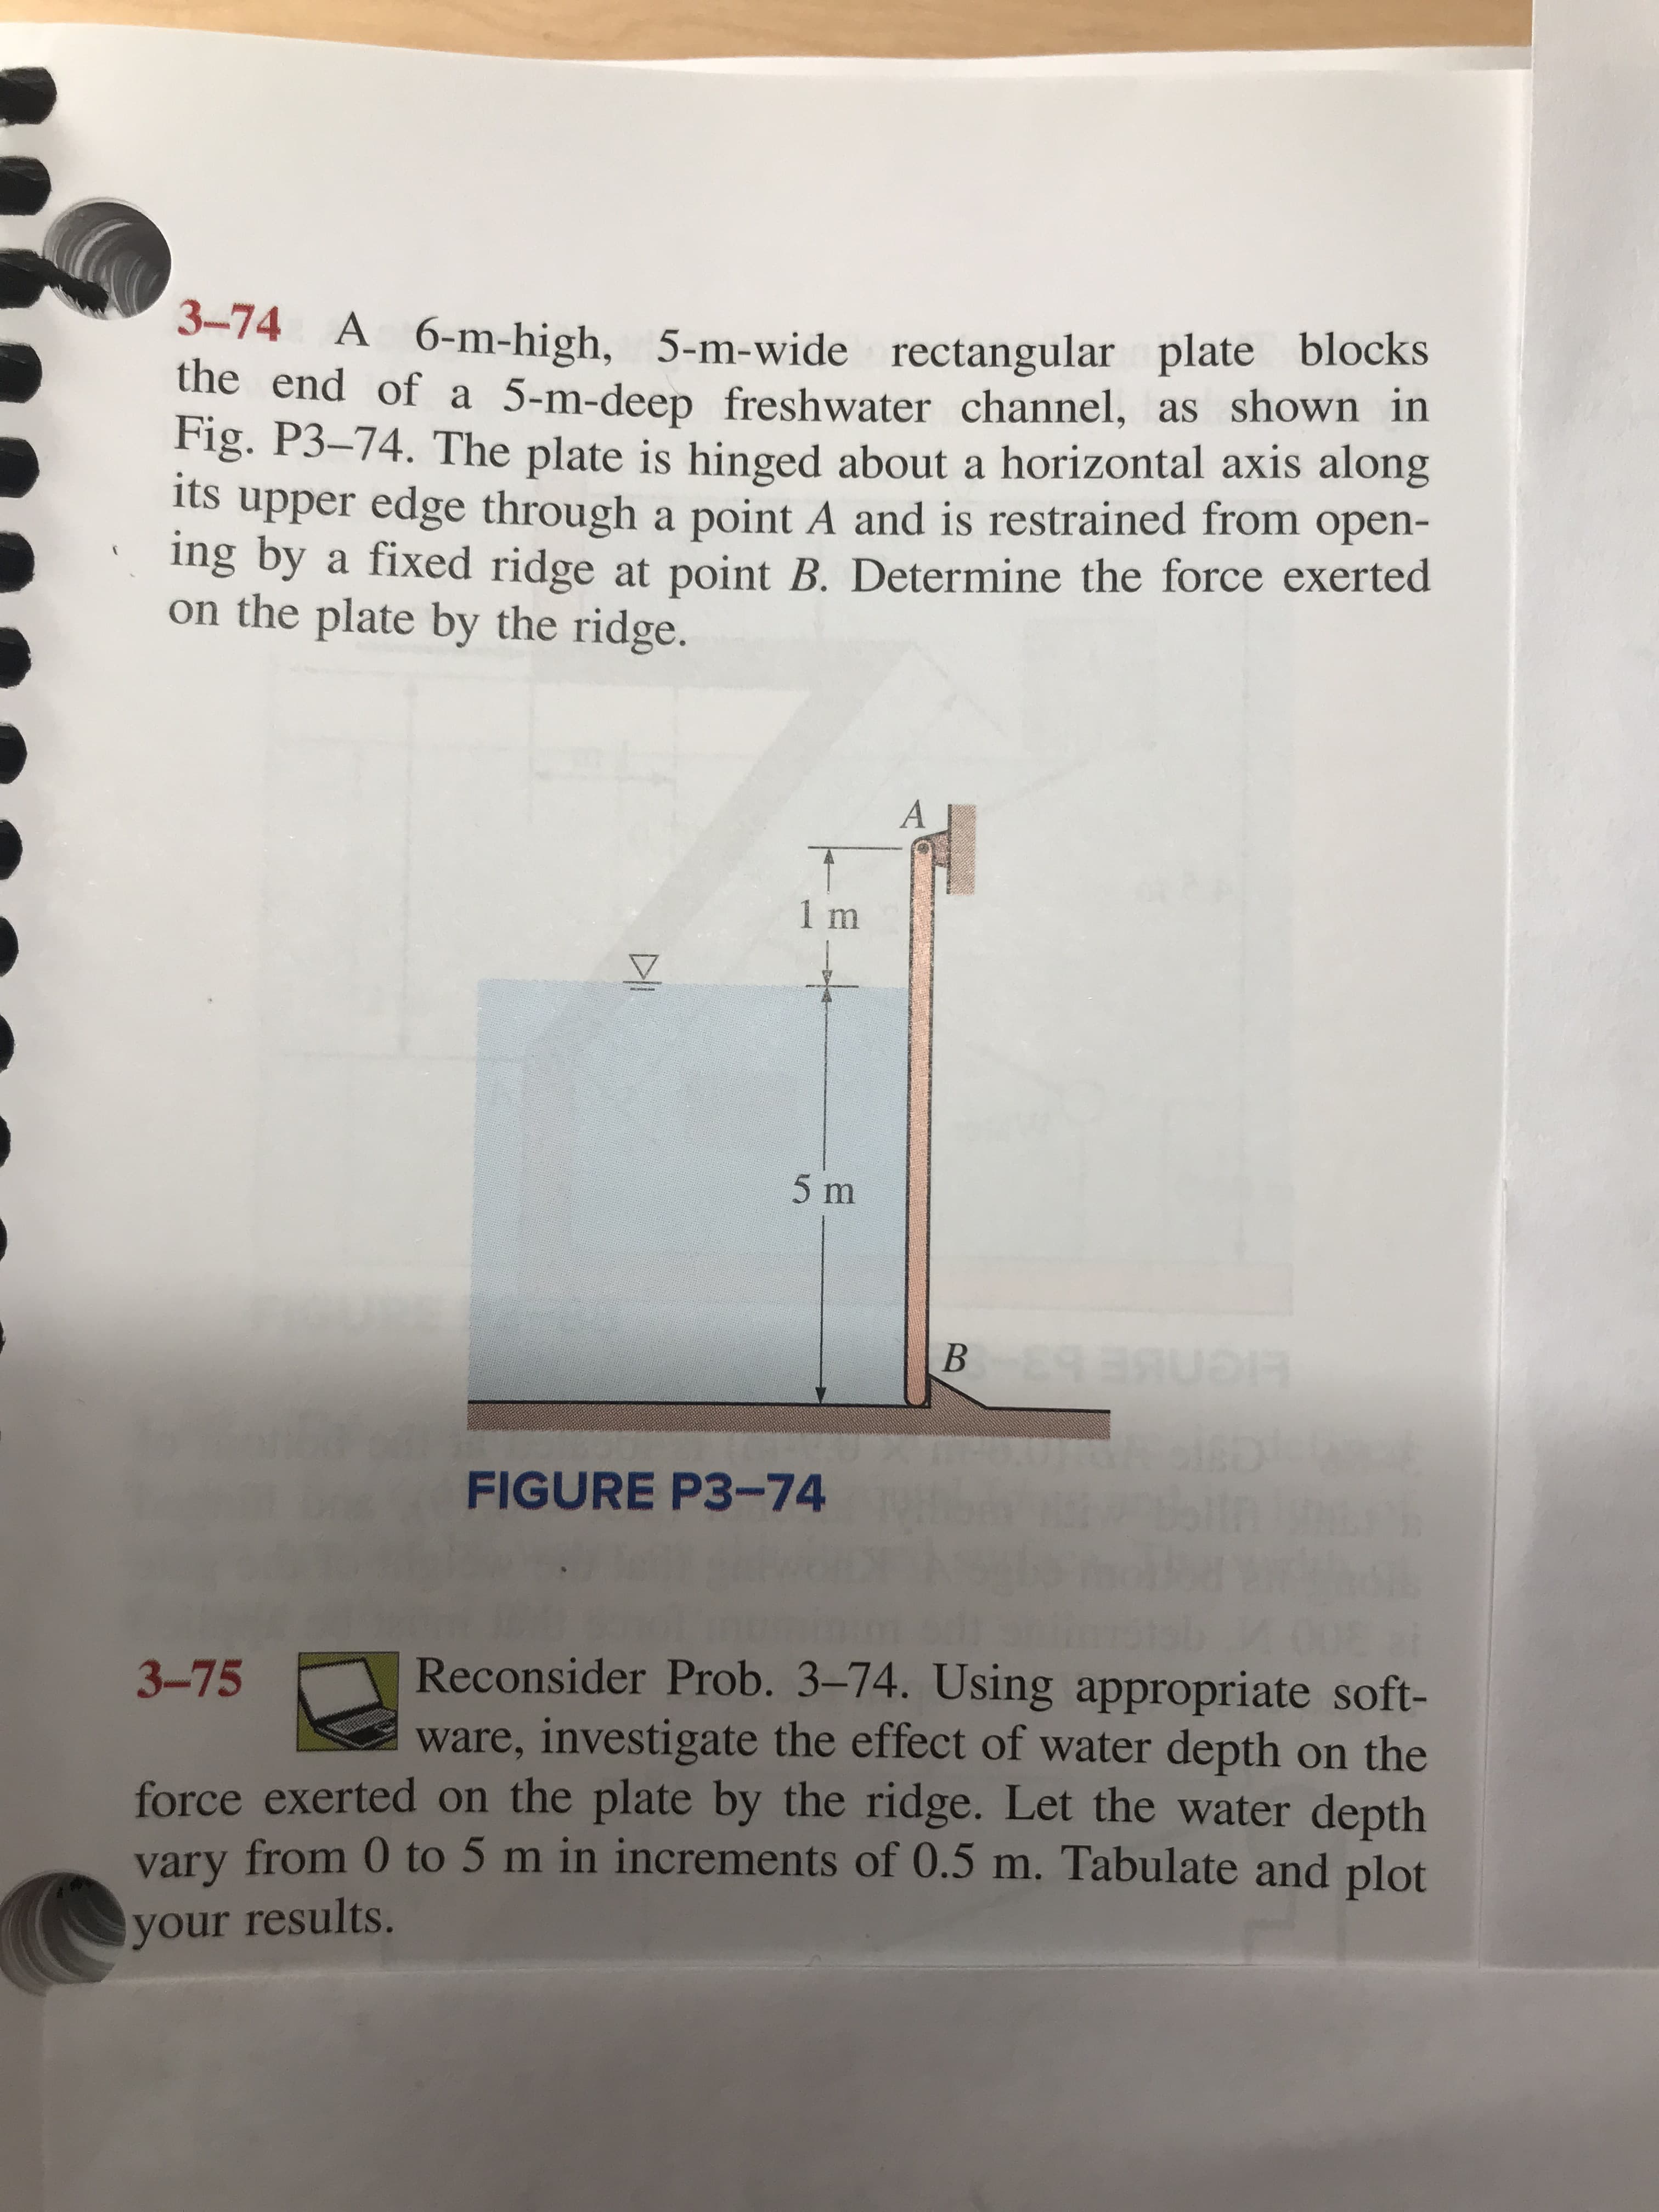 3-74 A 6-m-high, 5-m-wide rectangular plate blocks
the end of a 5-m-deep freshwater channel, as shown in
Fig. P3-74. The plate is hinged about a horizontal axis along
its od ser edge through a point A and is restrained from open-
ing by a fixed ridge at point B. Determine the force exerted
on the plate by the ridge.
A
T
1 m
5 m
B
cisD
FIGURE P3-74
Reconsider Prob. 3-74. Using appropriate soft-
ware, investigate the effect of water depth on the
force exerted on the plate by the ridge. Let the water depth
vary from 0 to 5 m in increments of 0.5 m. Tabulate and plot
3-75
your results.
